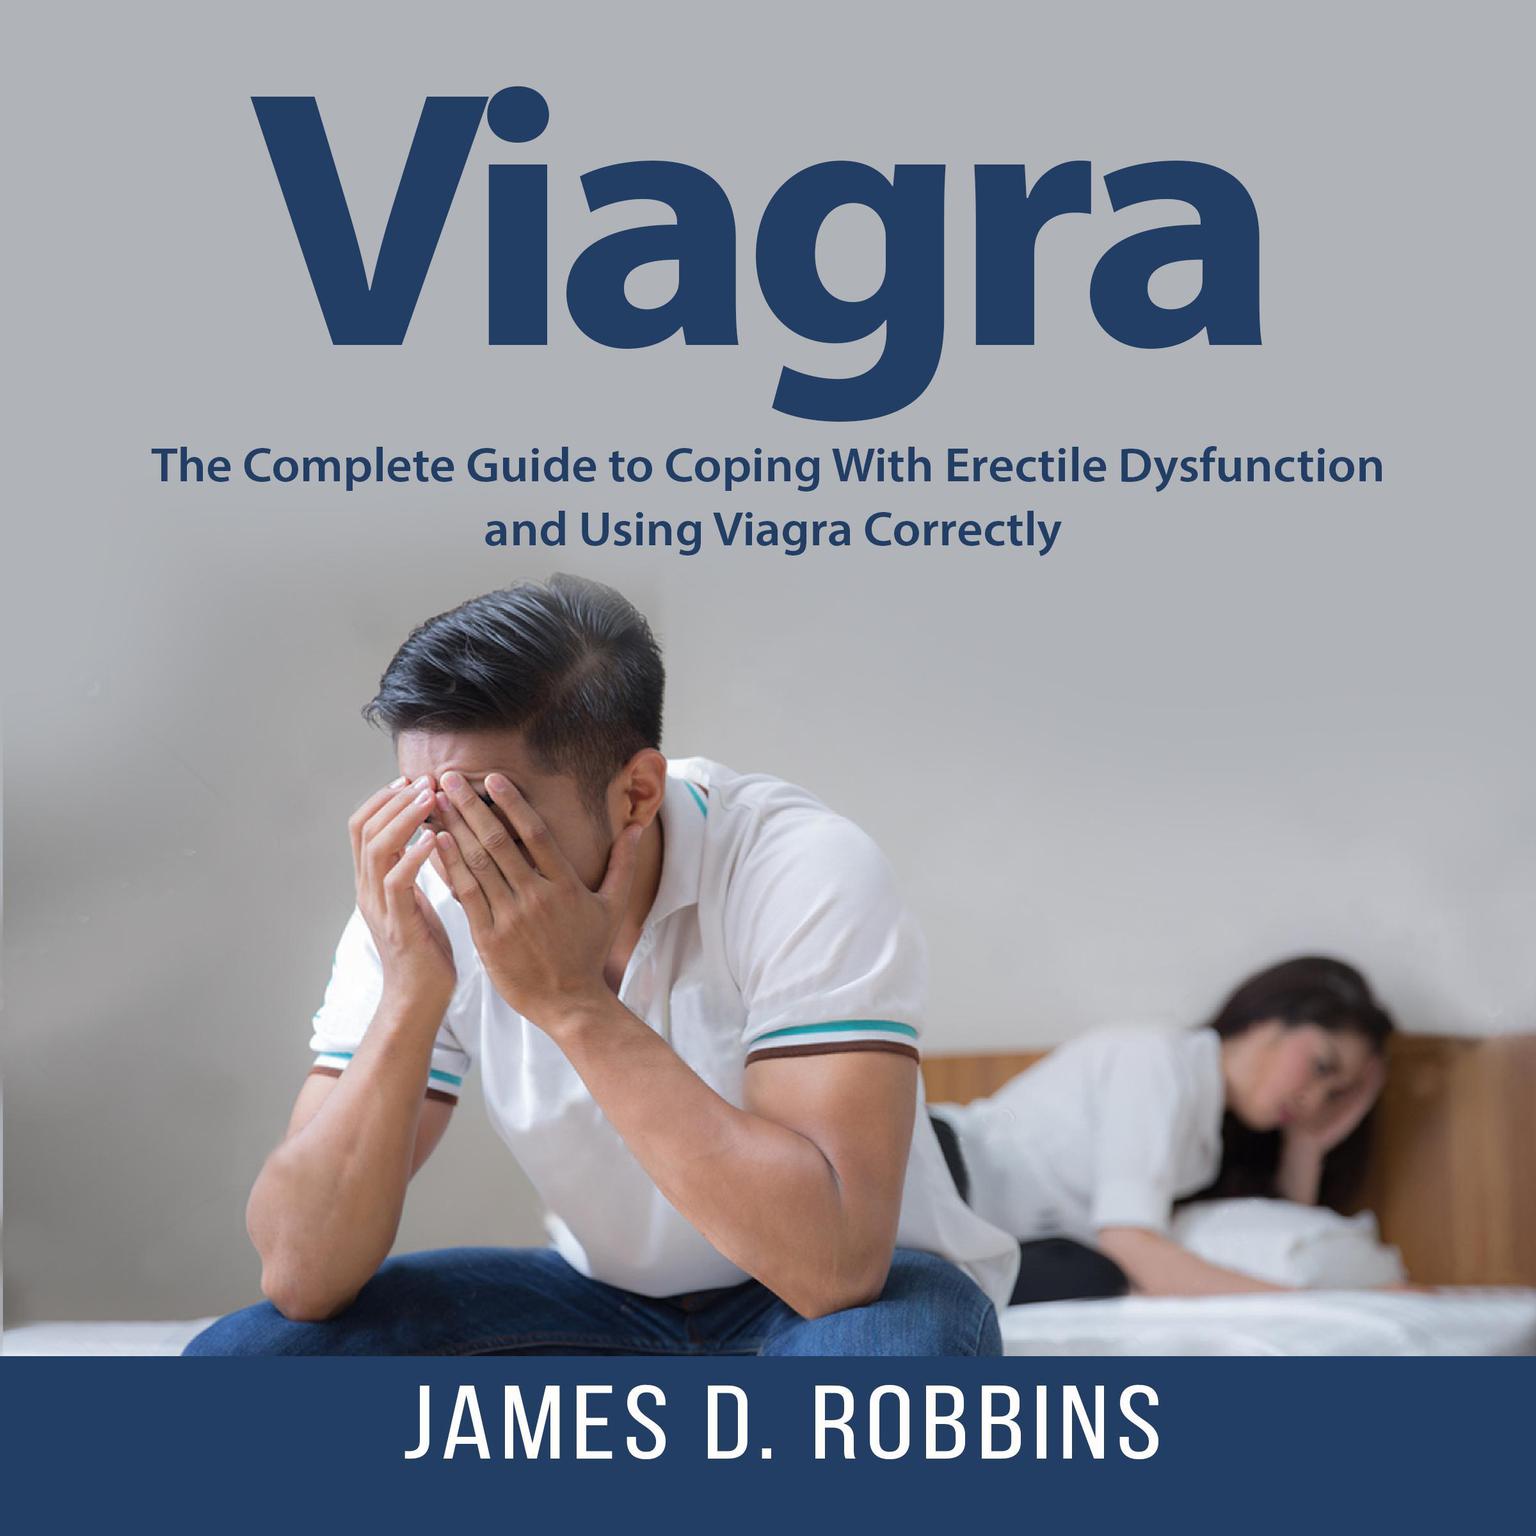 Viagra: The Complete Guide to Coping With Erectile Dysfunction and Using Viagra Correctly Audiobook, by James D. Robbins